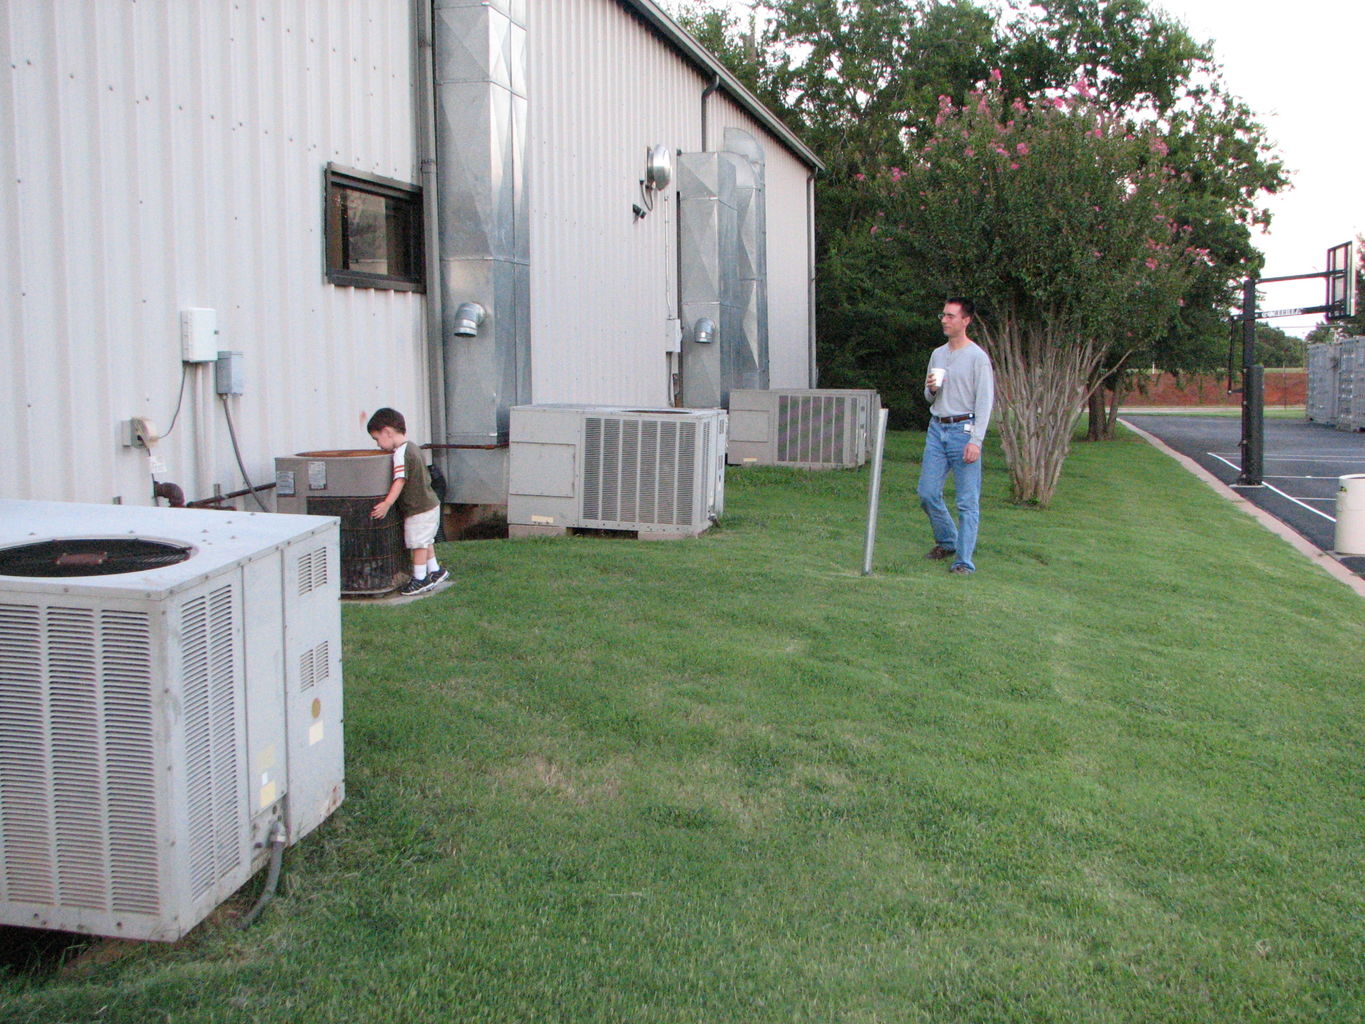 Pictures of Teleflora and the Heat Pumps
